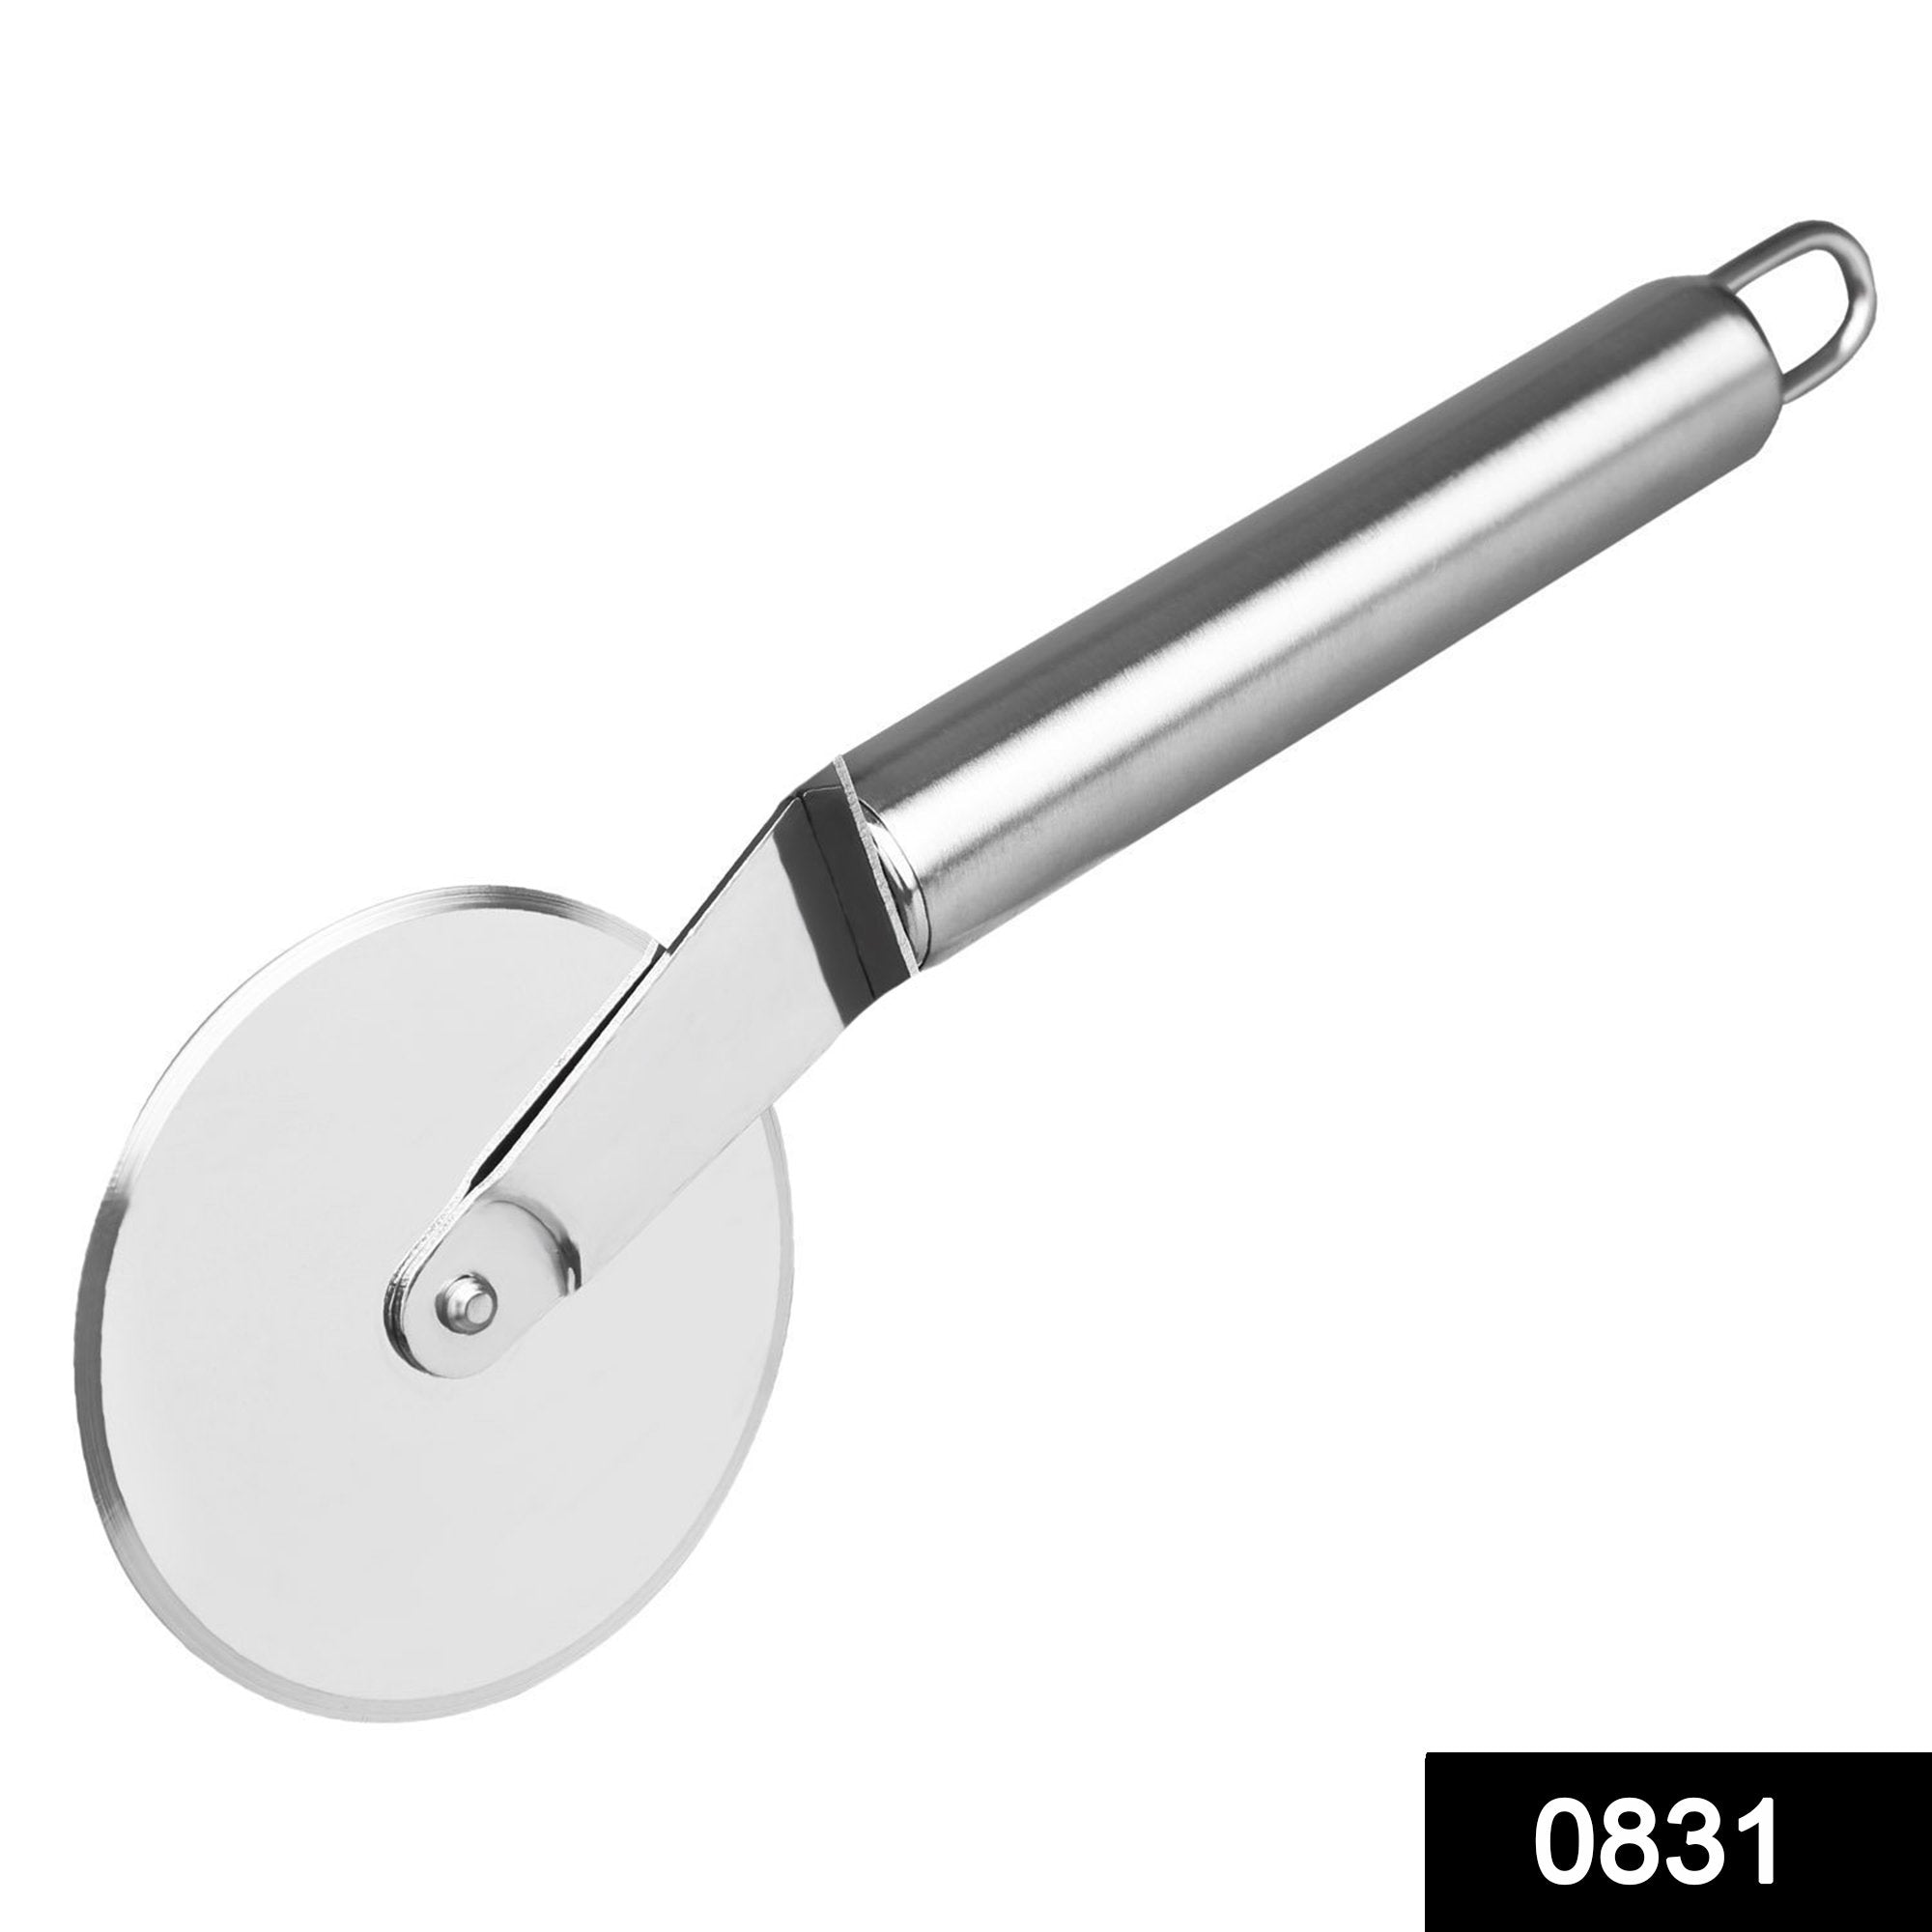 0831 Stainless Steal Pizza Cutter and for Sandwiches Pastry - SkyShopy